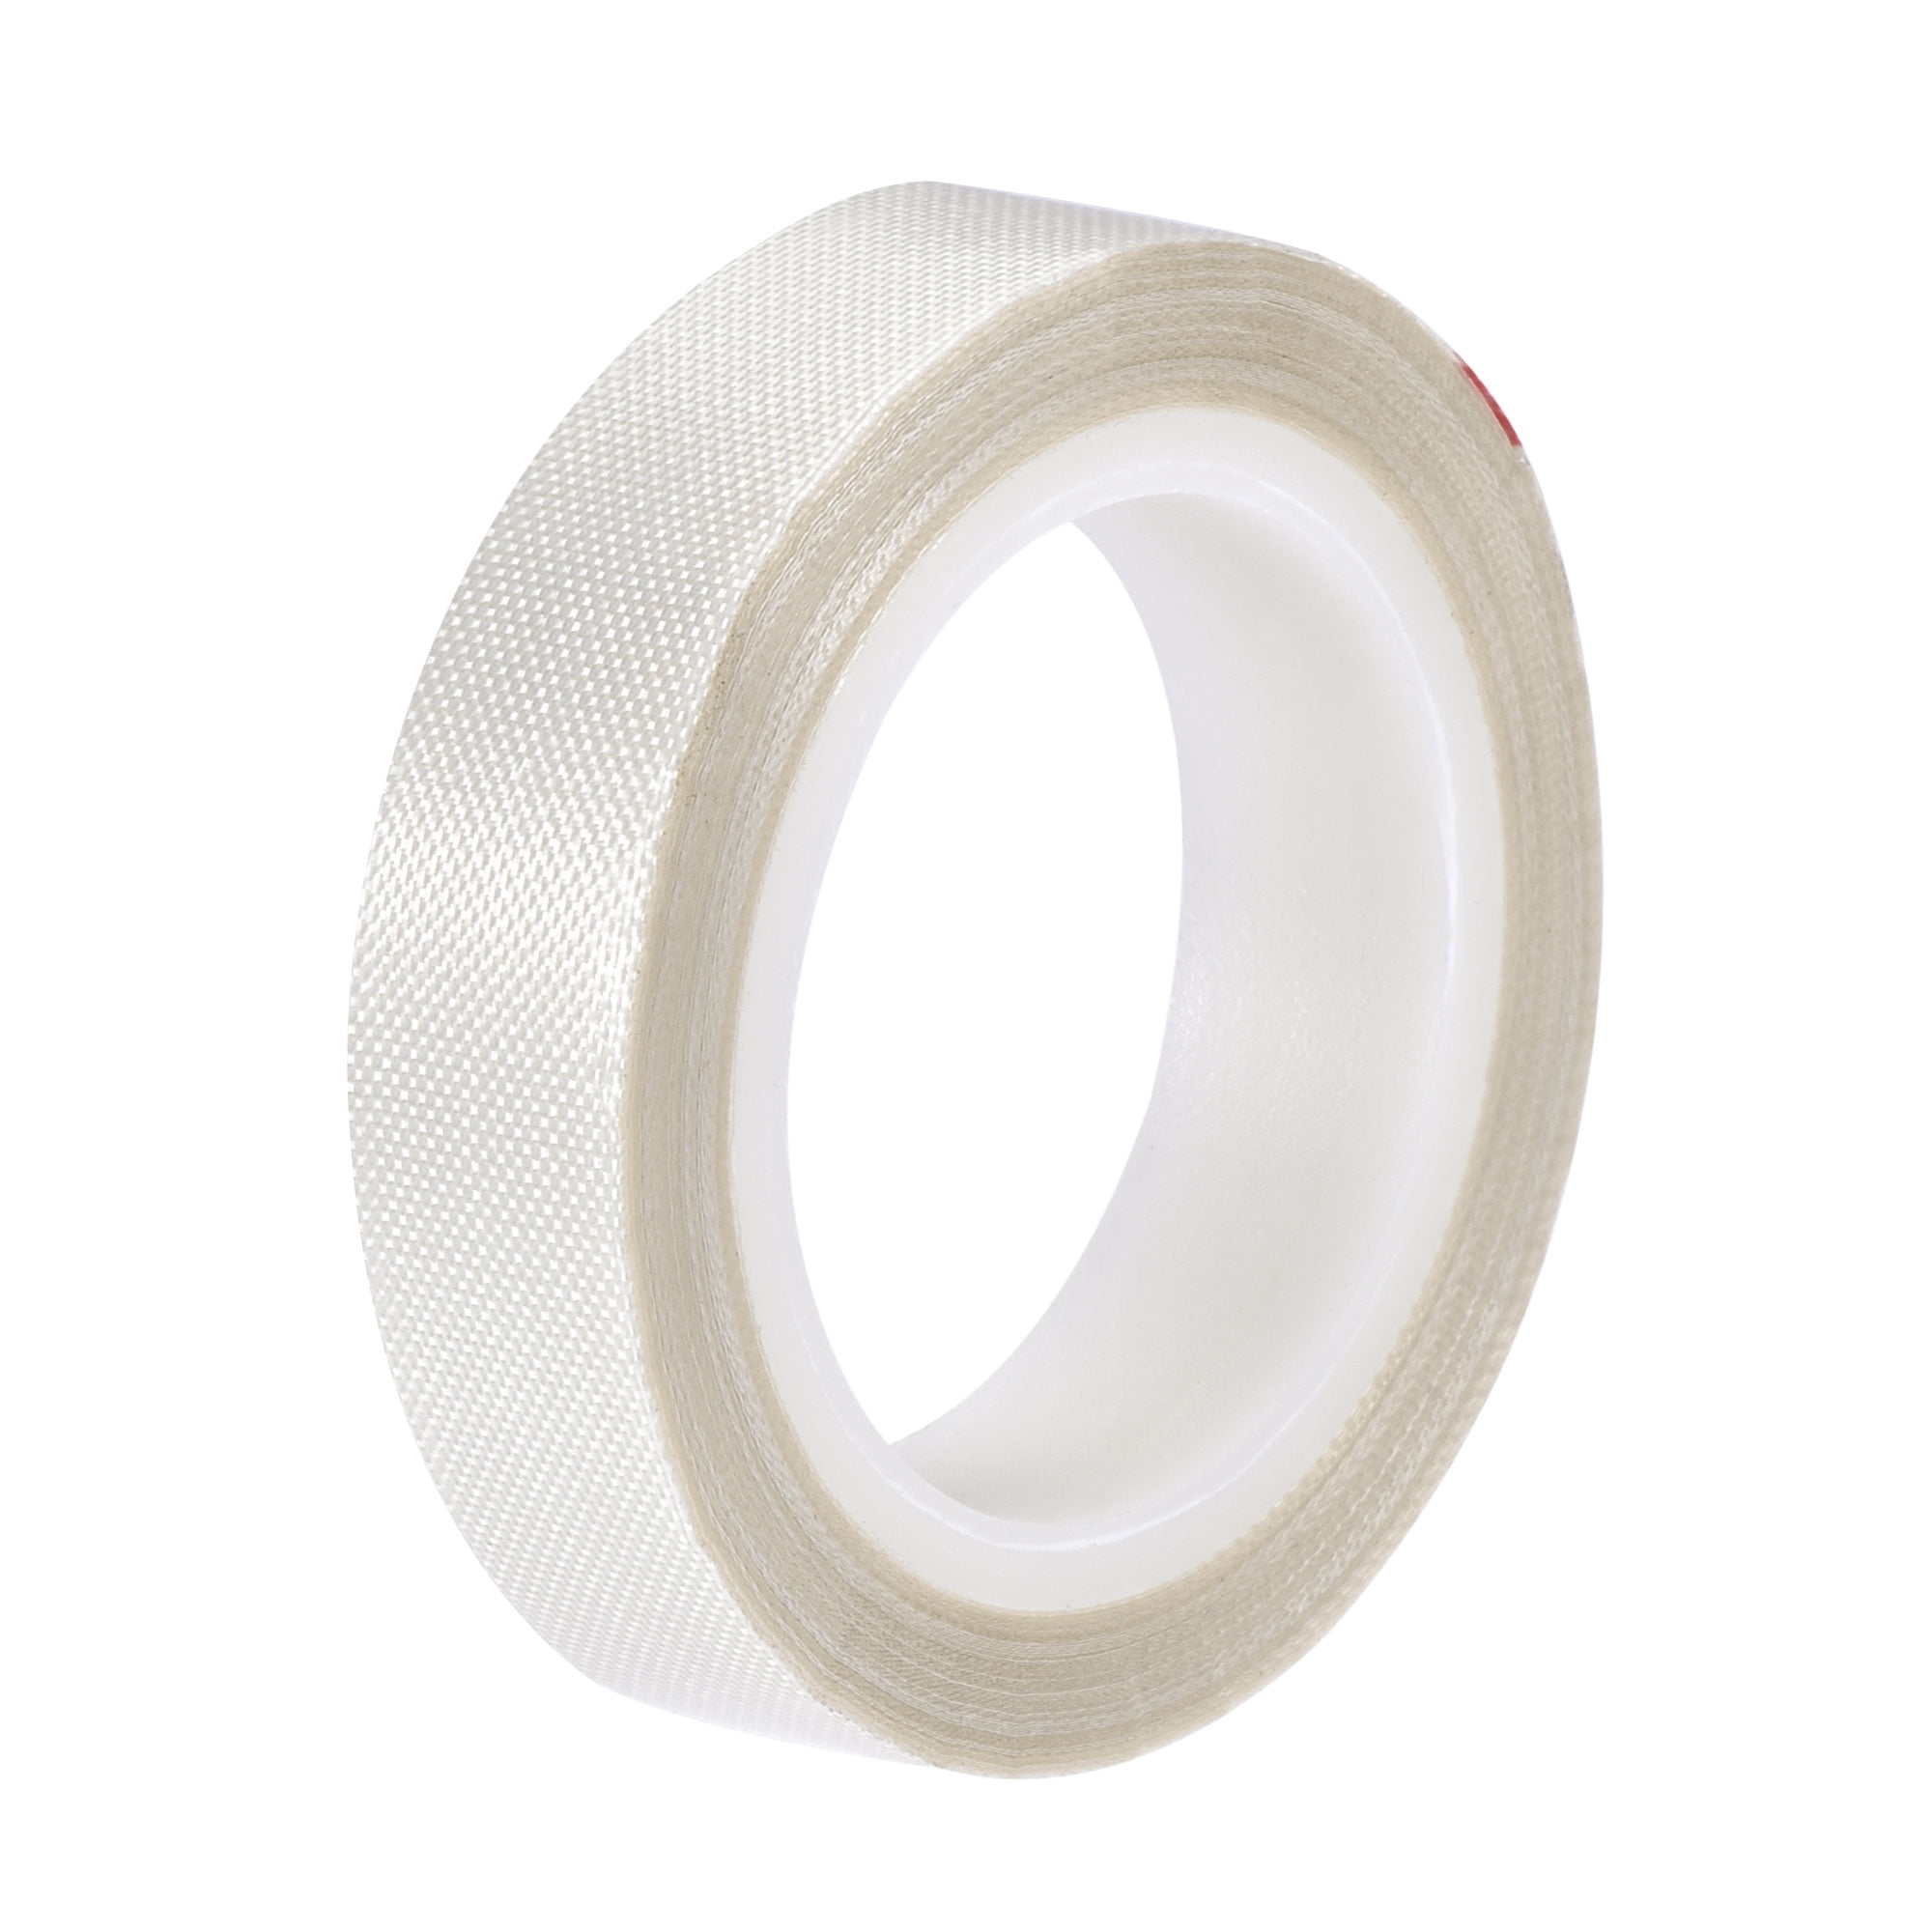 Uxcell Heat Resistant Tape High Temperature Heat Transfer Tape PTFE Film  Adhesive Tape 1.97 Width 33ft Length Black